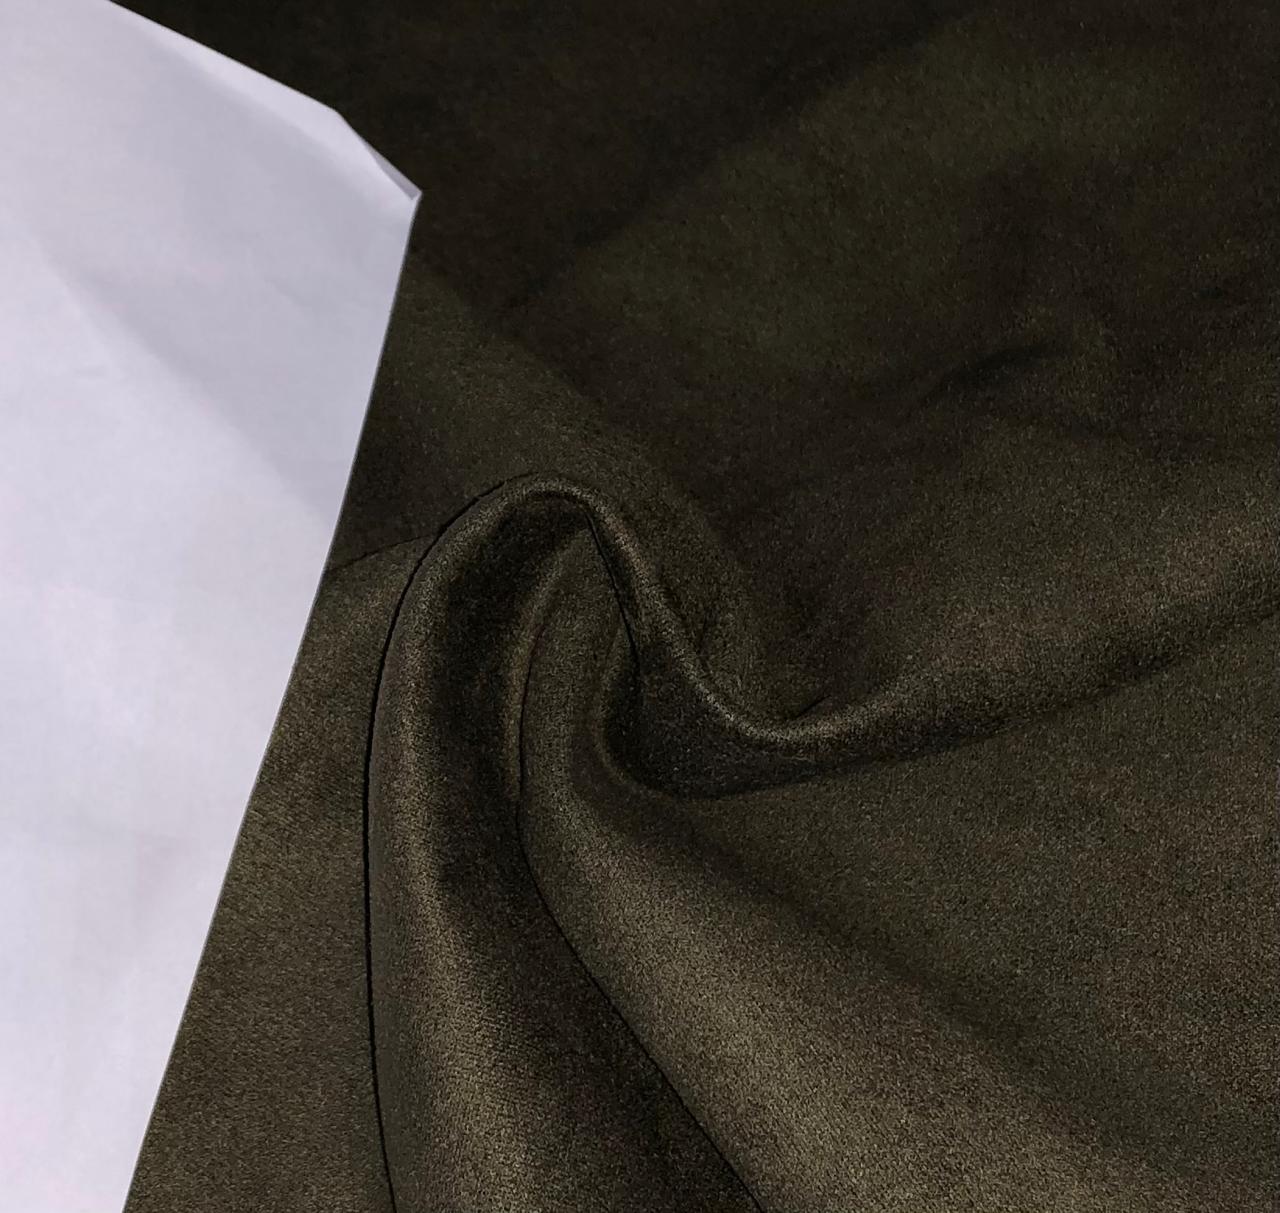 Scuba Suede Knit fabric 59" wide- fashion wear REVERSABLE MOSS BROWN COLOR AND BLACK [15941]